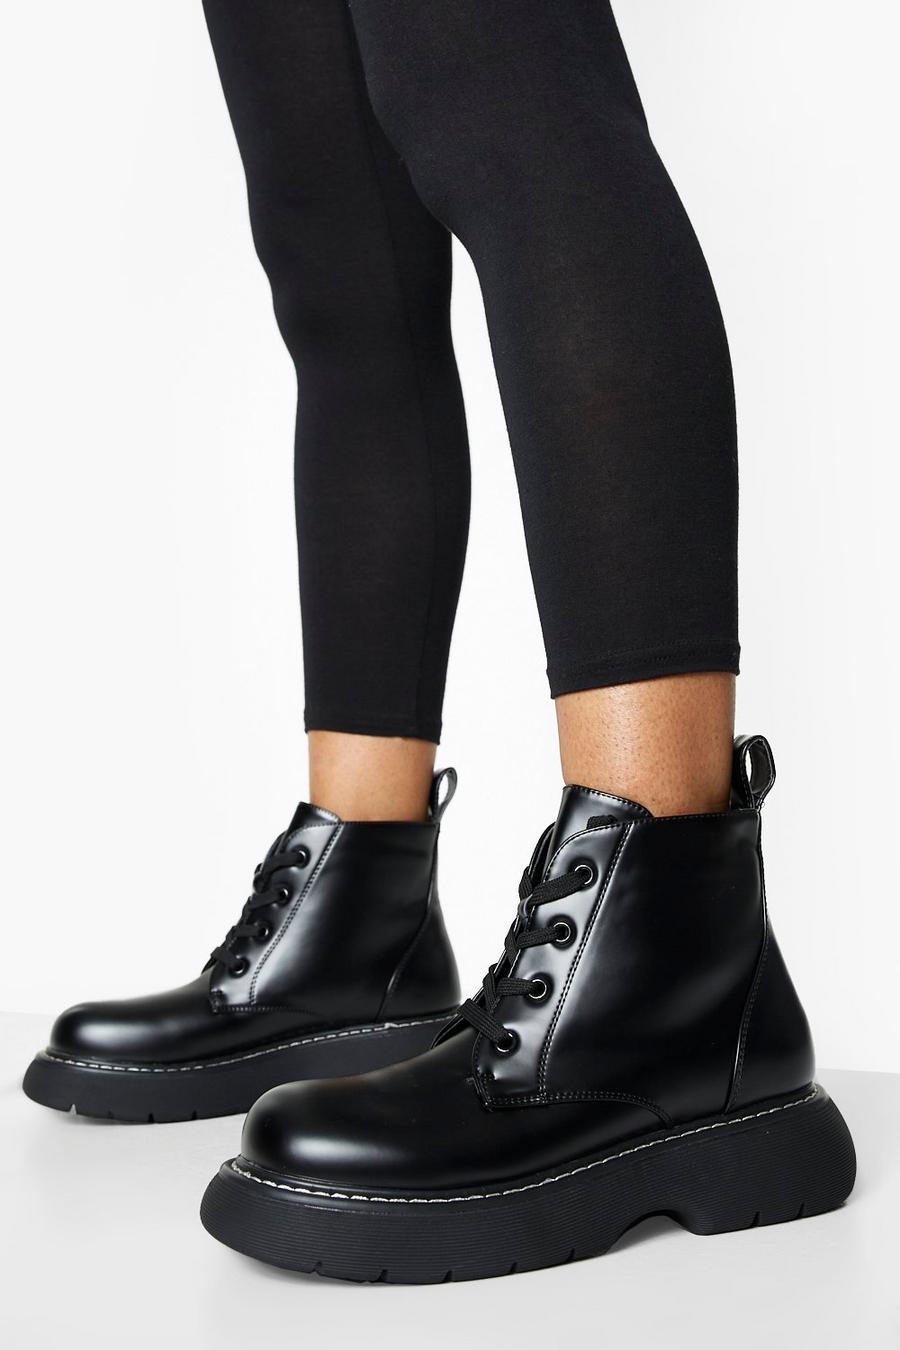 Black Chunky Sole Lace Up Combat Boots